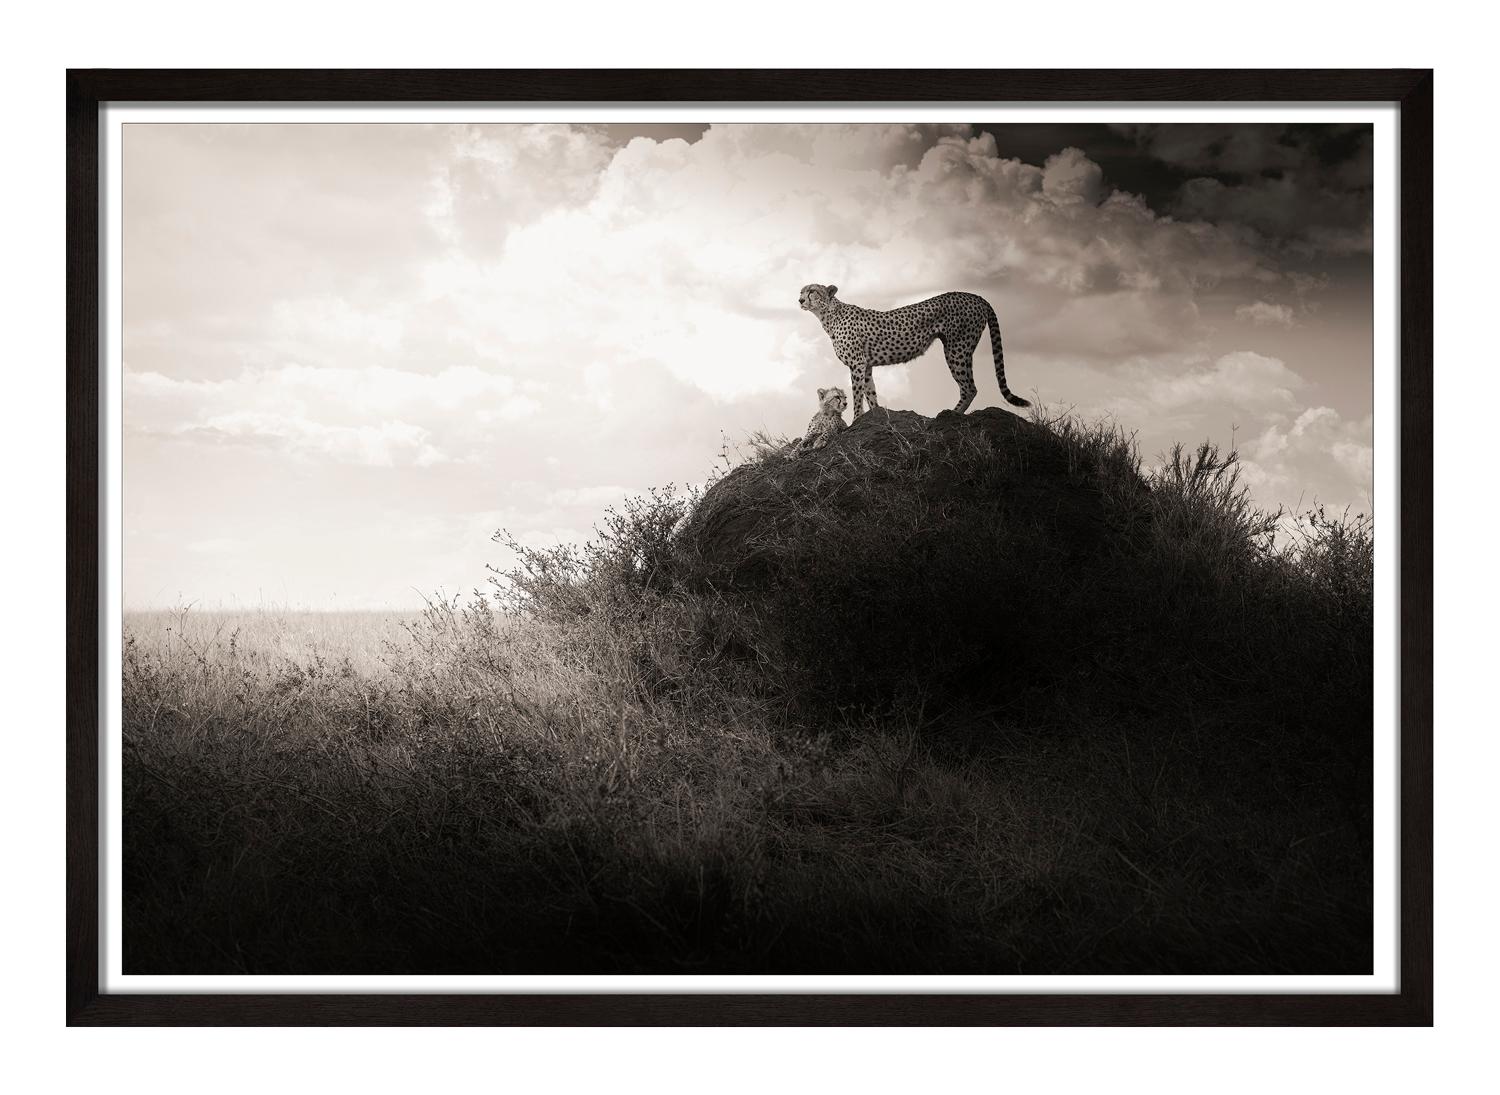 Edition of 7
more sizes on request

A Cheetah mum and her child are on a termite mould to look for prey.

Joachim Schmeisser is represented by leading Galleries worldwide. His photographs are among the most sought-after and best-selling works in